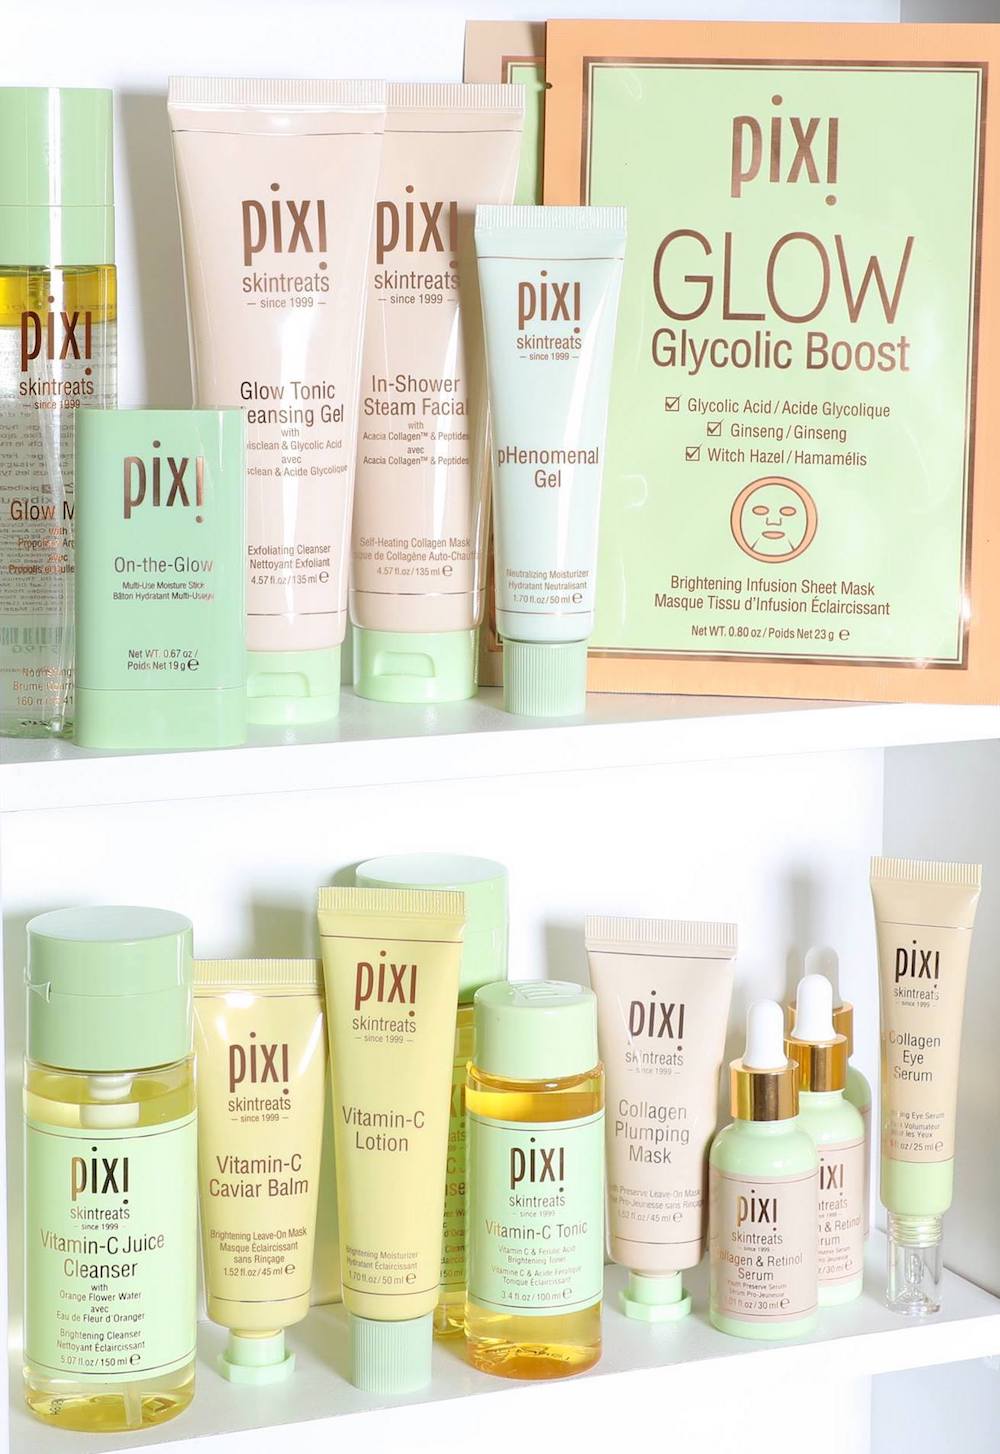 New Skincare products from Pixi Beauty